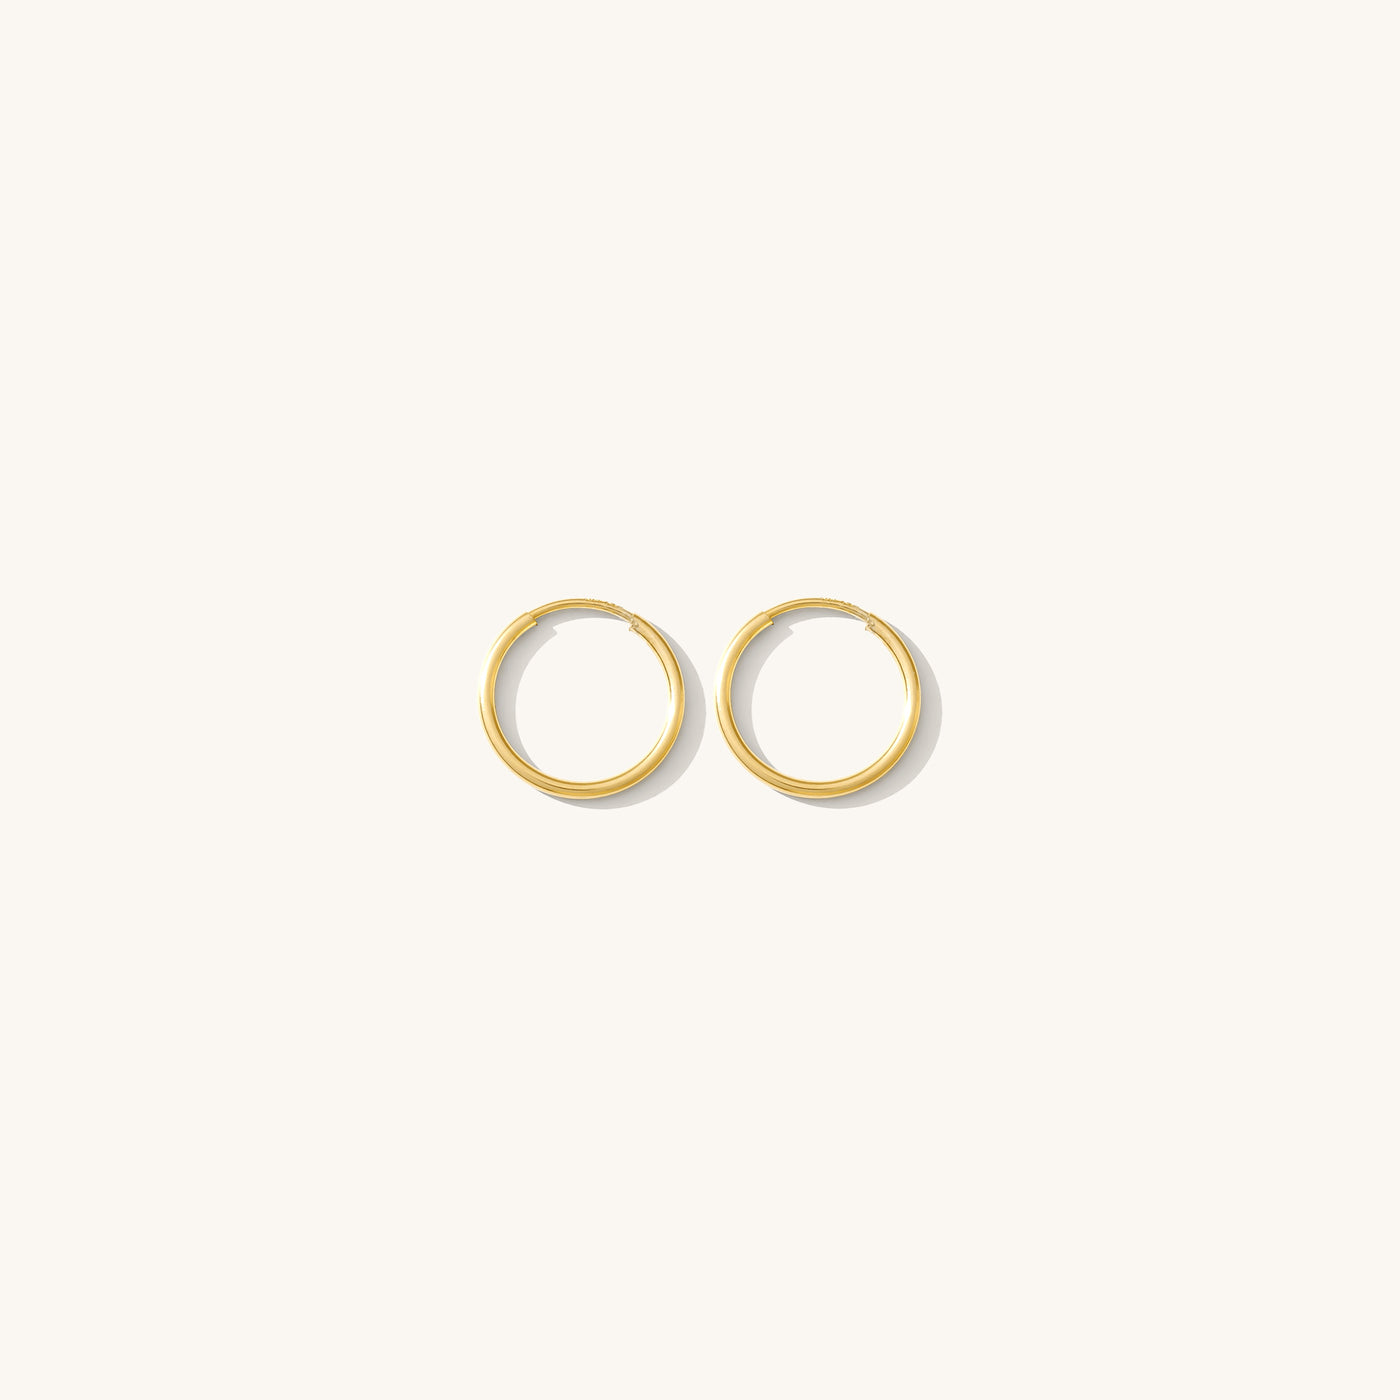 Thin Hoop Earrings Small (14mm) Gold Filled